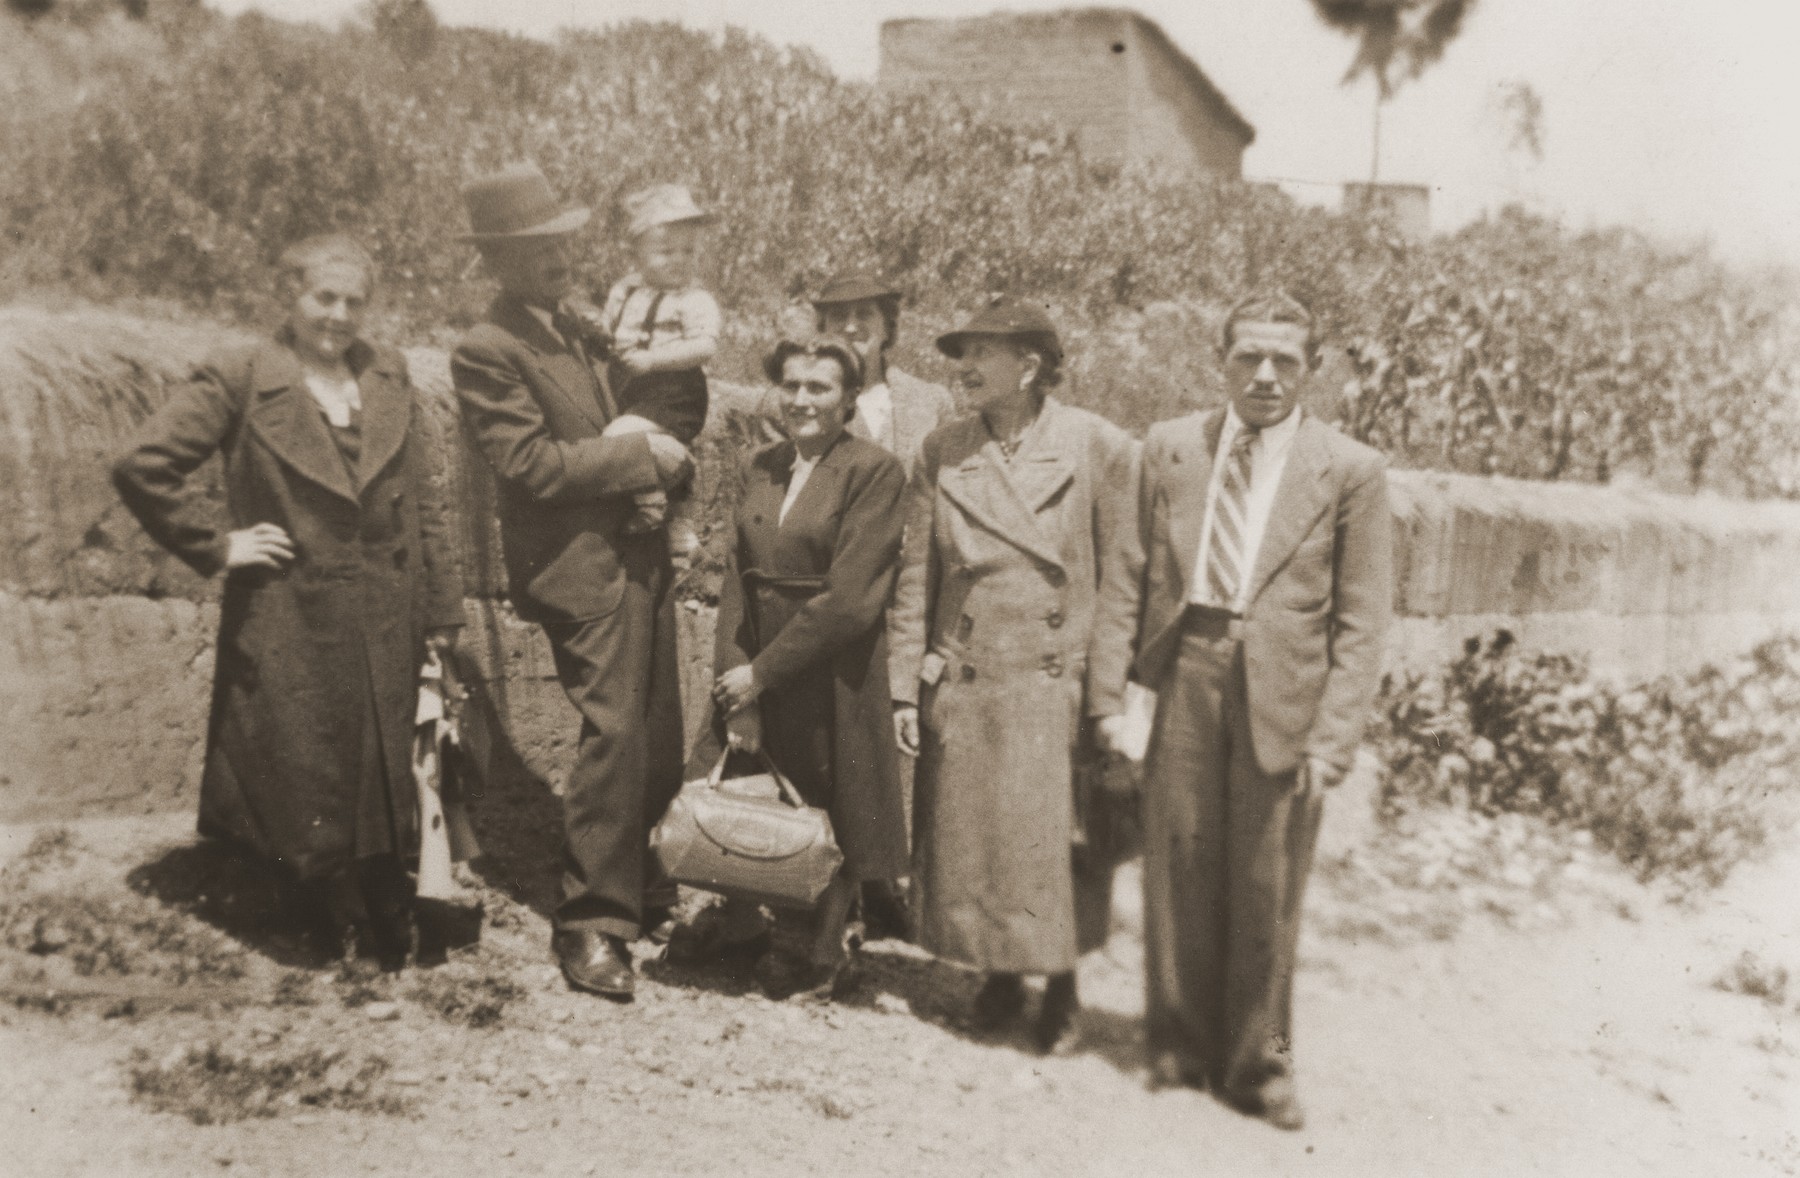 Members of the extended Spitzer family and friends in La Paz. 

Pictured from left to right are Bertha and Nathan Wolfinger; Leo Spitzer; Rosie Spitzer; unknown; Lina Spitzer; and Ferry Kohn.